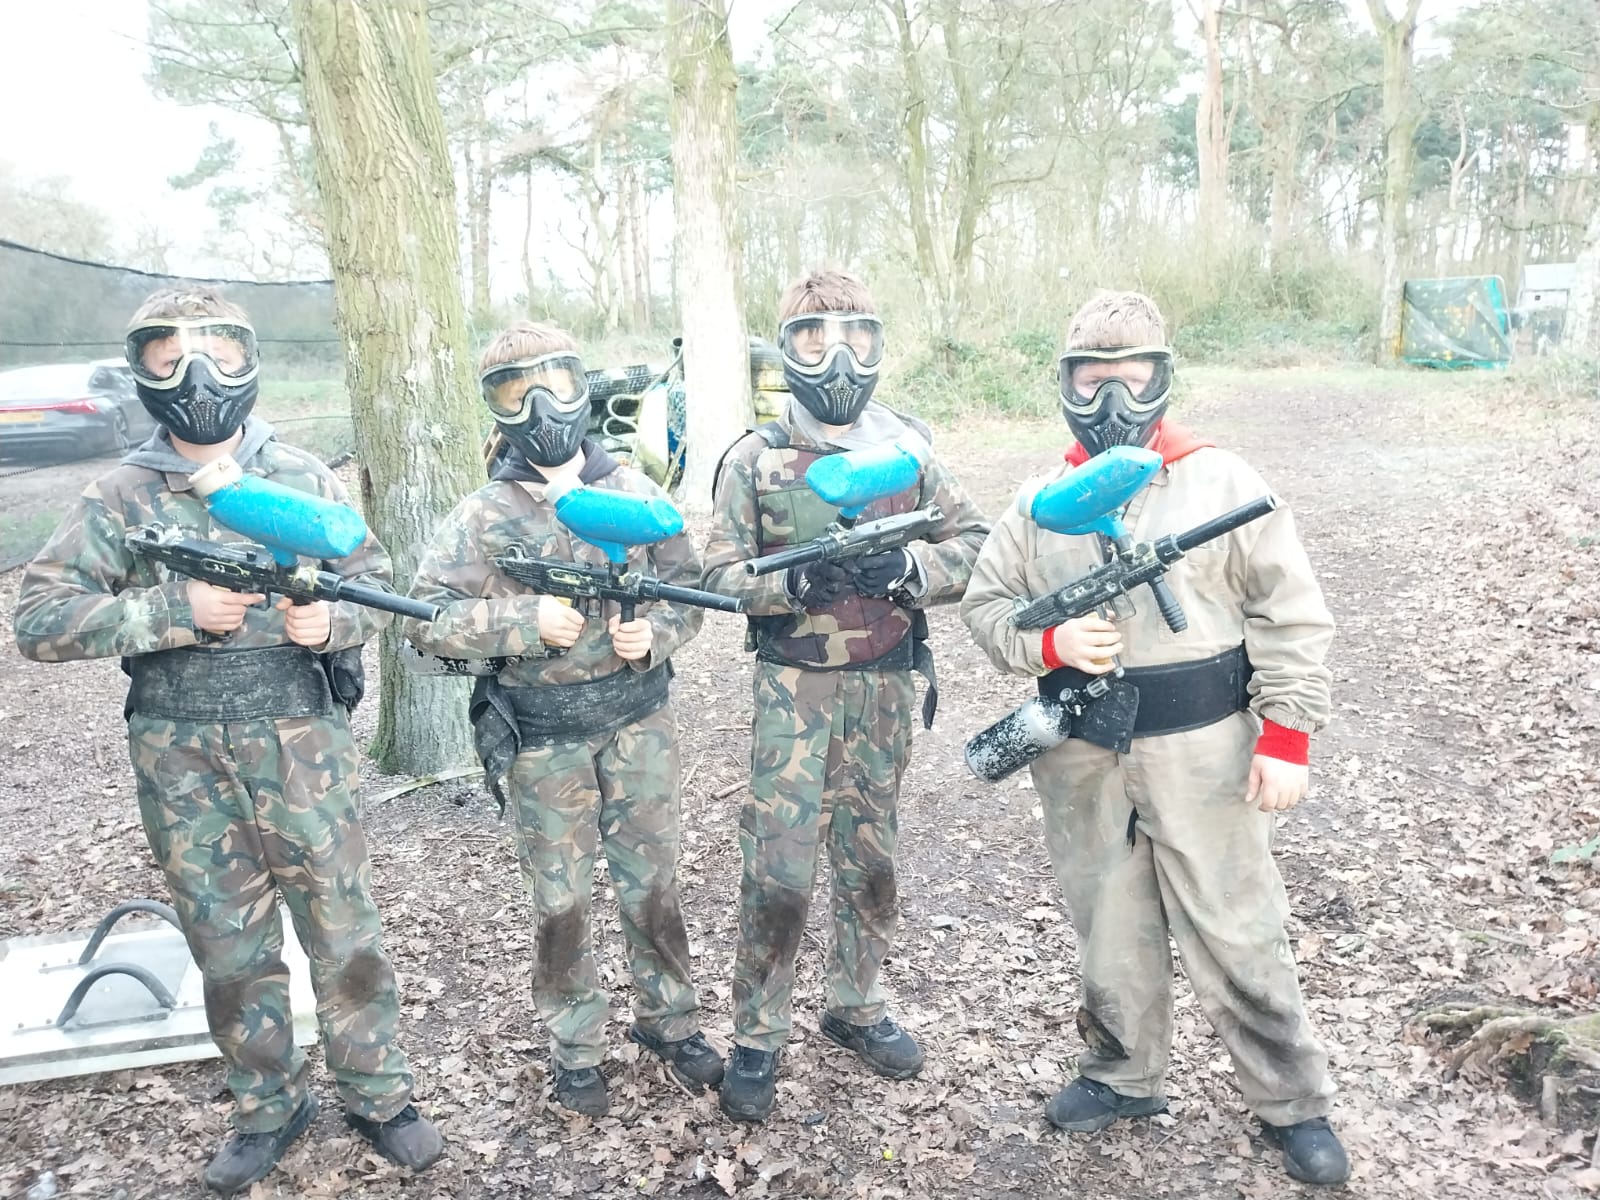 PaintBall Pay and play: - BlasterMasters